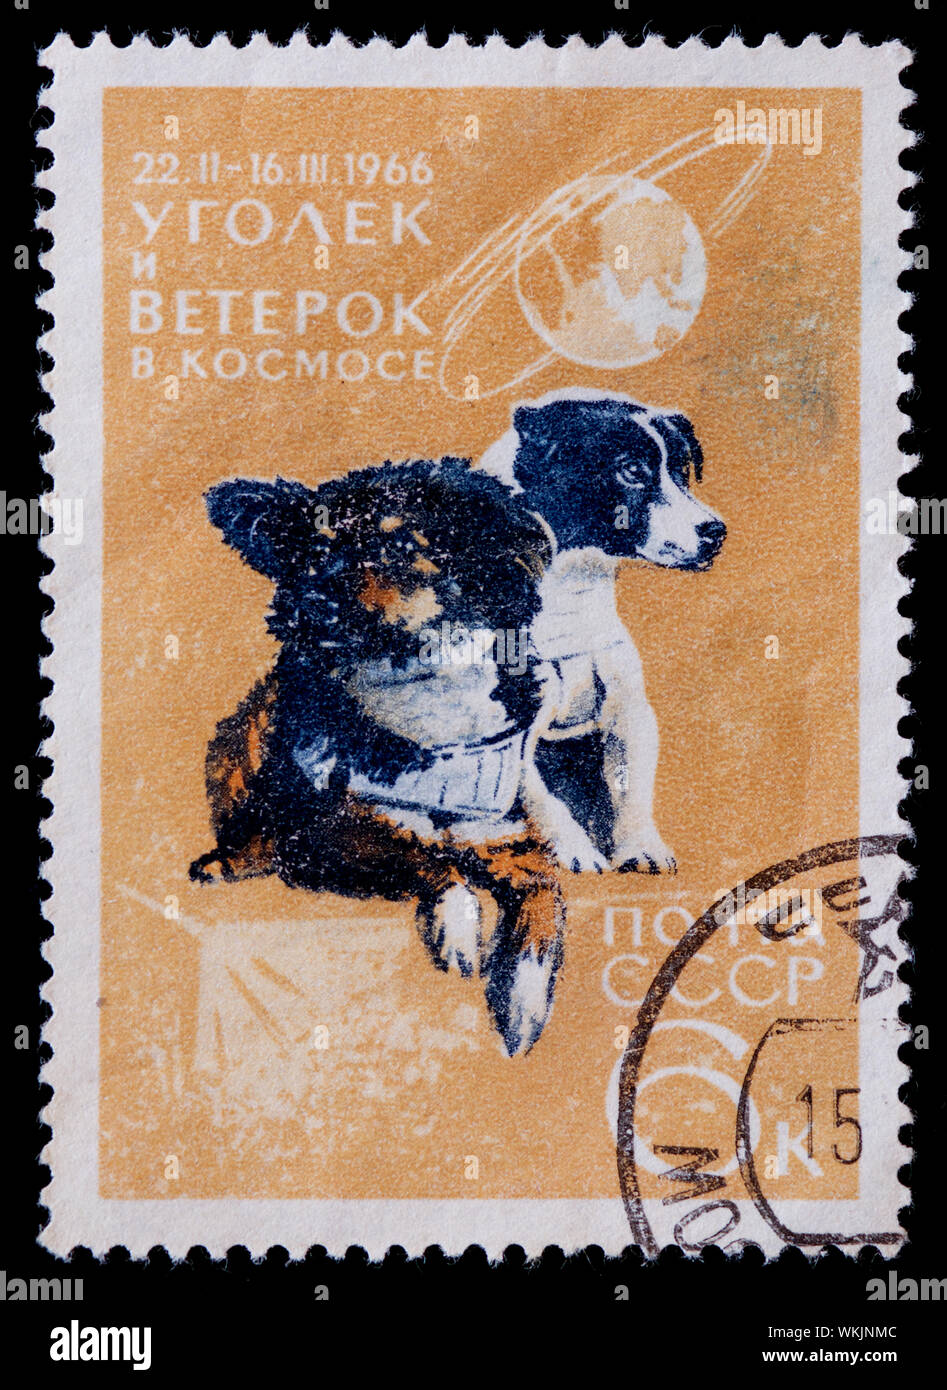 Soviet Union Postage Stamp - Dogs (Canis lupus familiaris) Ugolok and Weterok Stock Photo